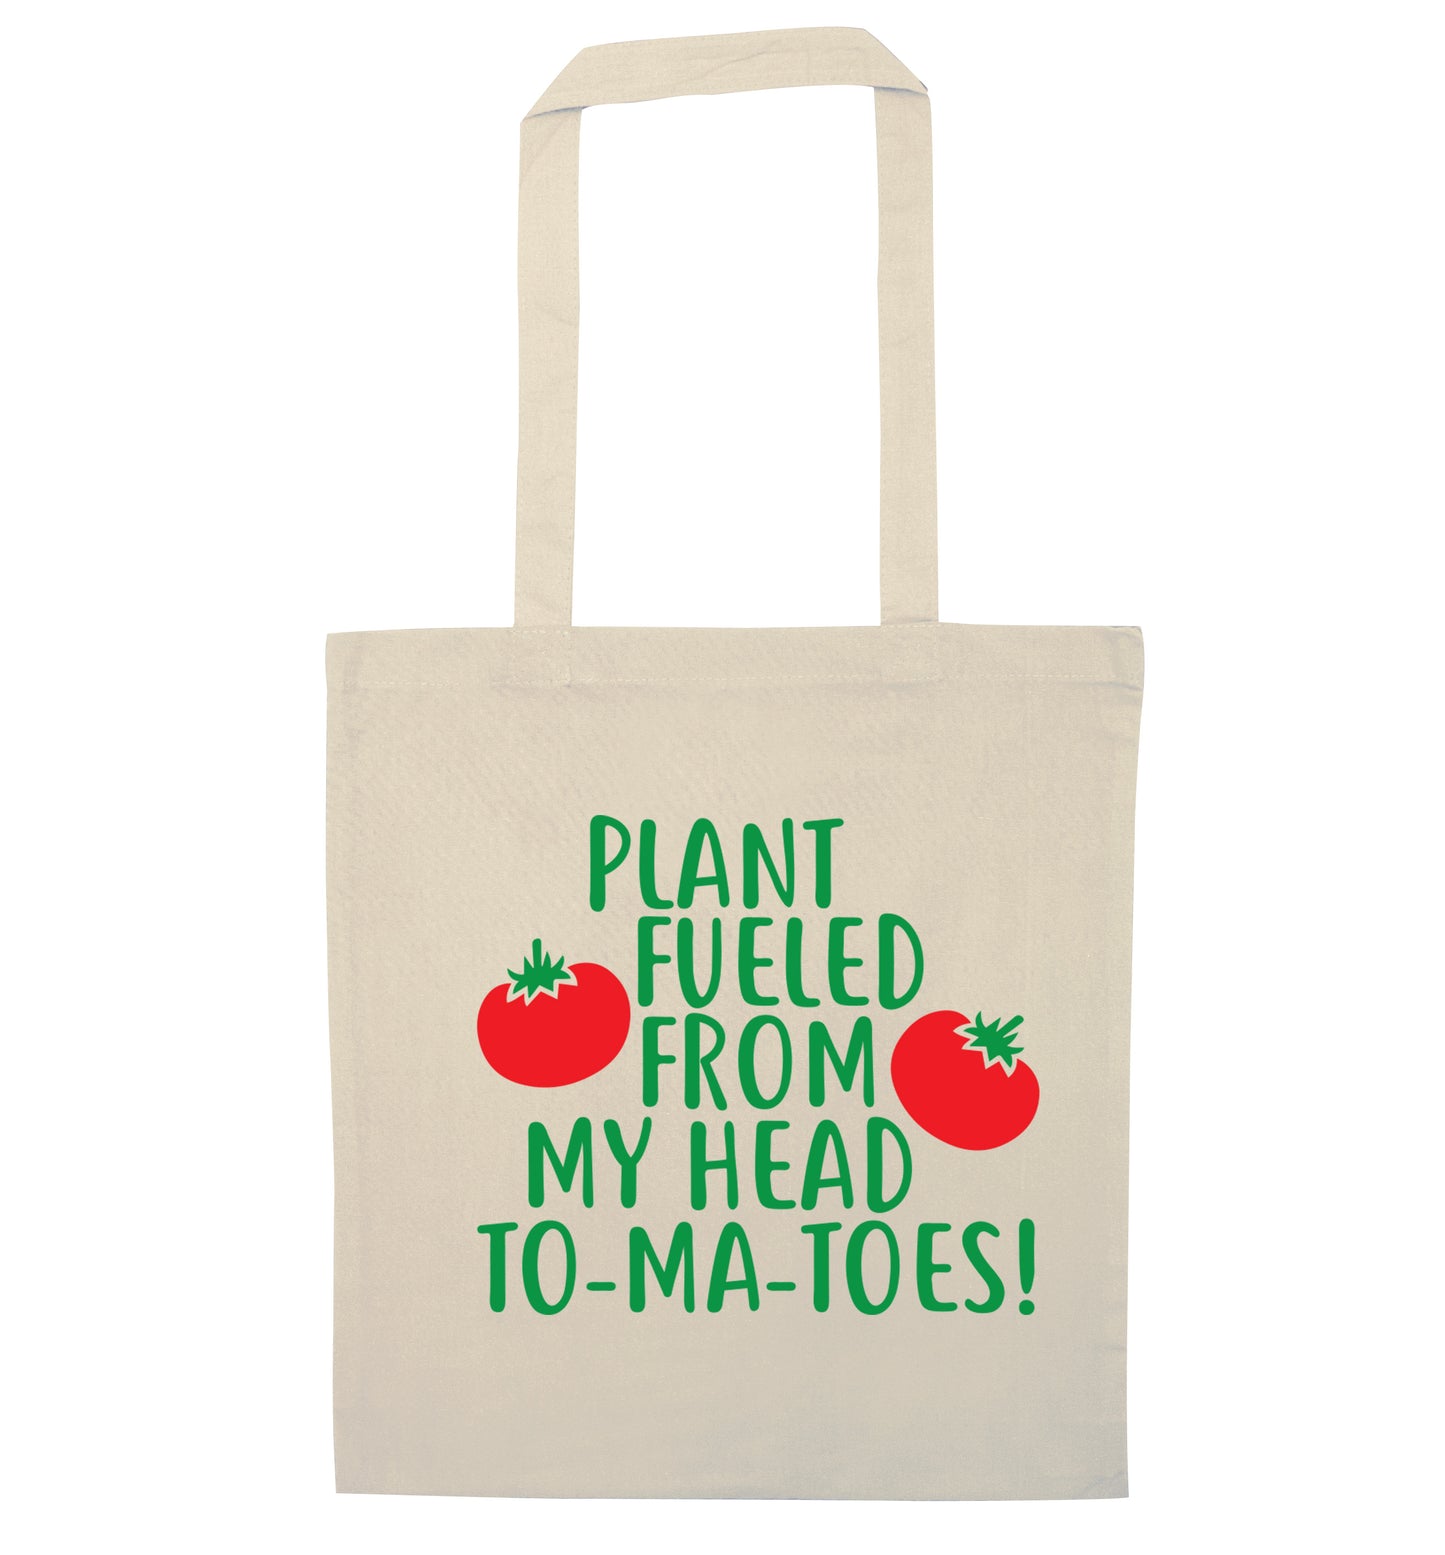 Plant fueled from my head to-ma-toes natural tote bag